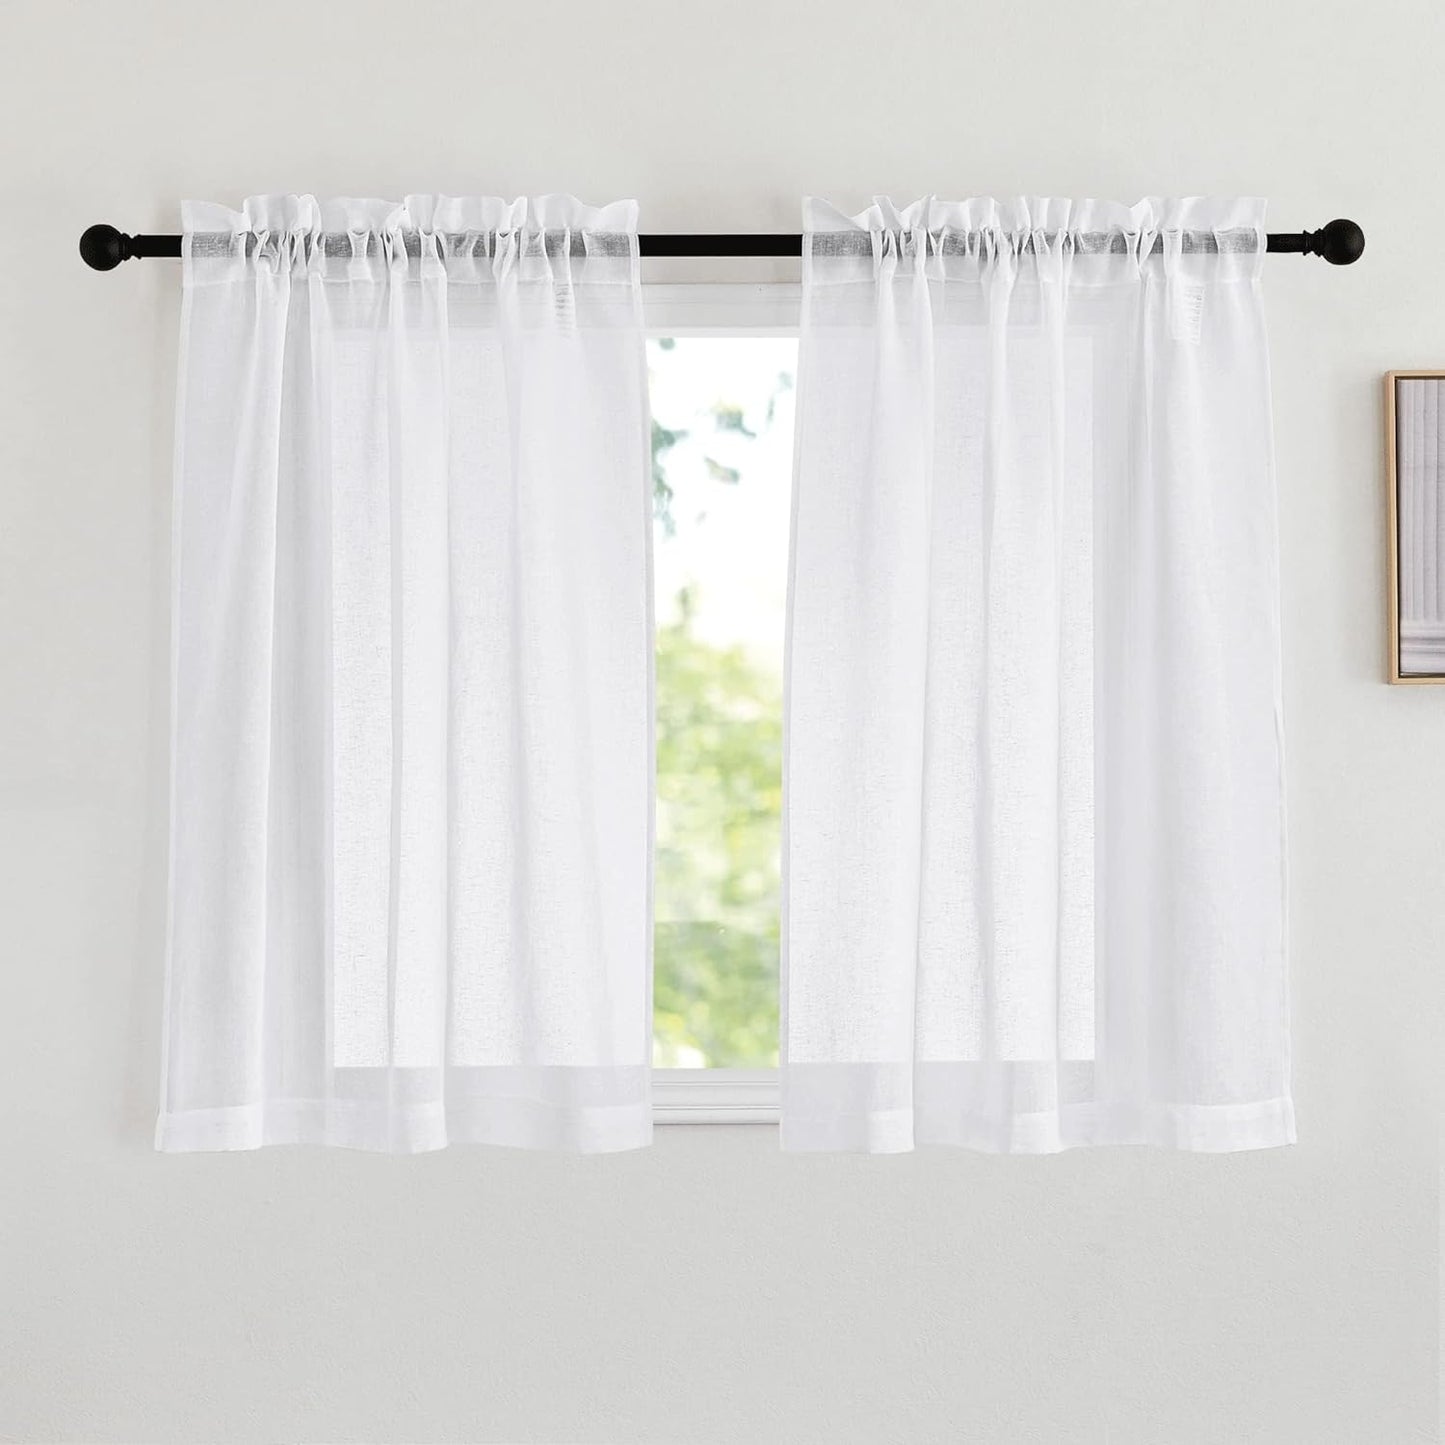 NICETOWN Natural Linen Curtains & Drapes for Windows 84 Inch Long, Rod Pocket Thick Flax Semi Sheer Privacy Assured with Light Filtering for Bedroom/Living Room, W55 X L84, 2 Pieces  NICETOWN White W42 X L45 